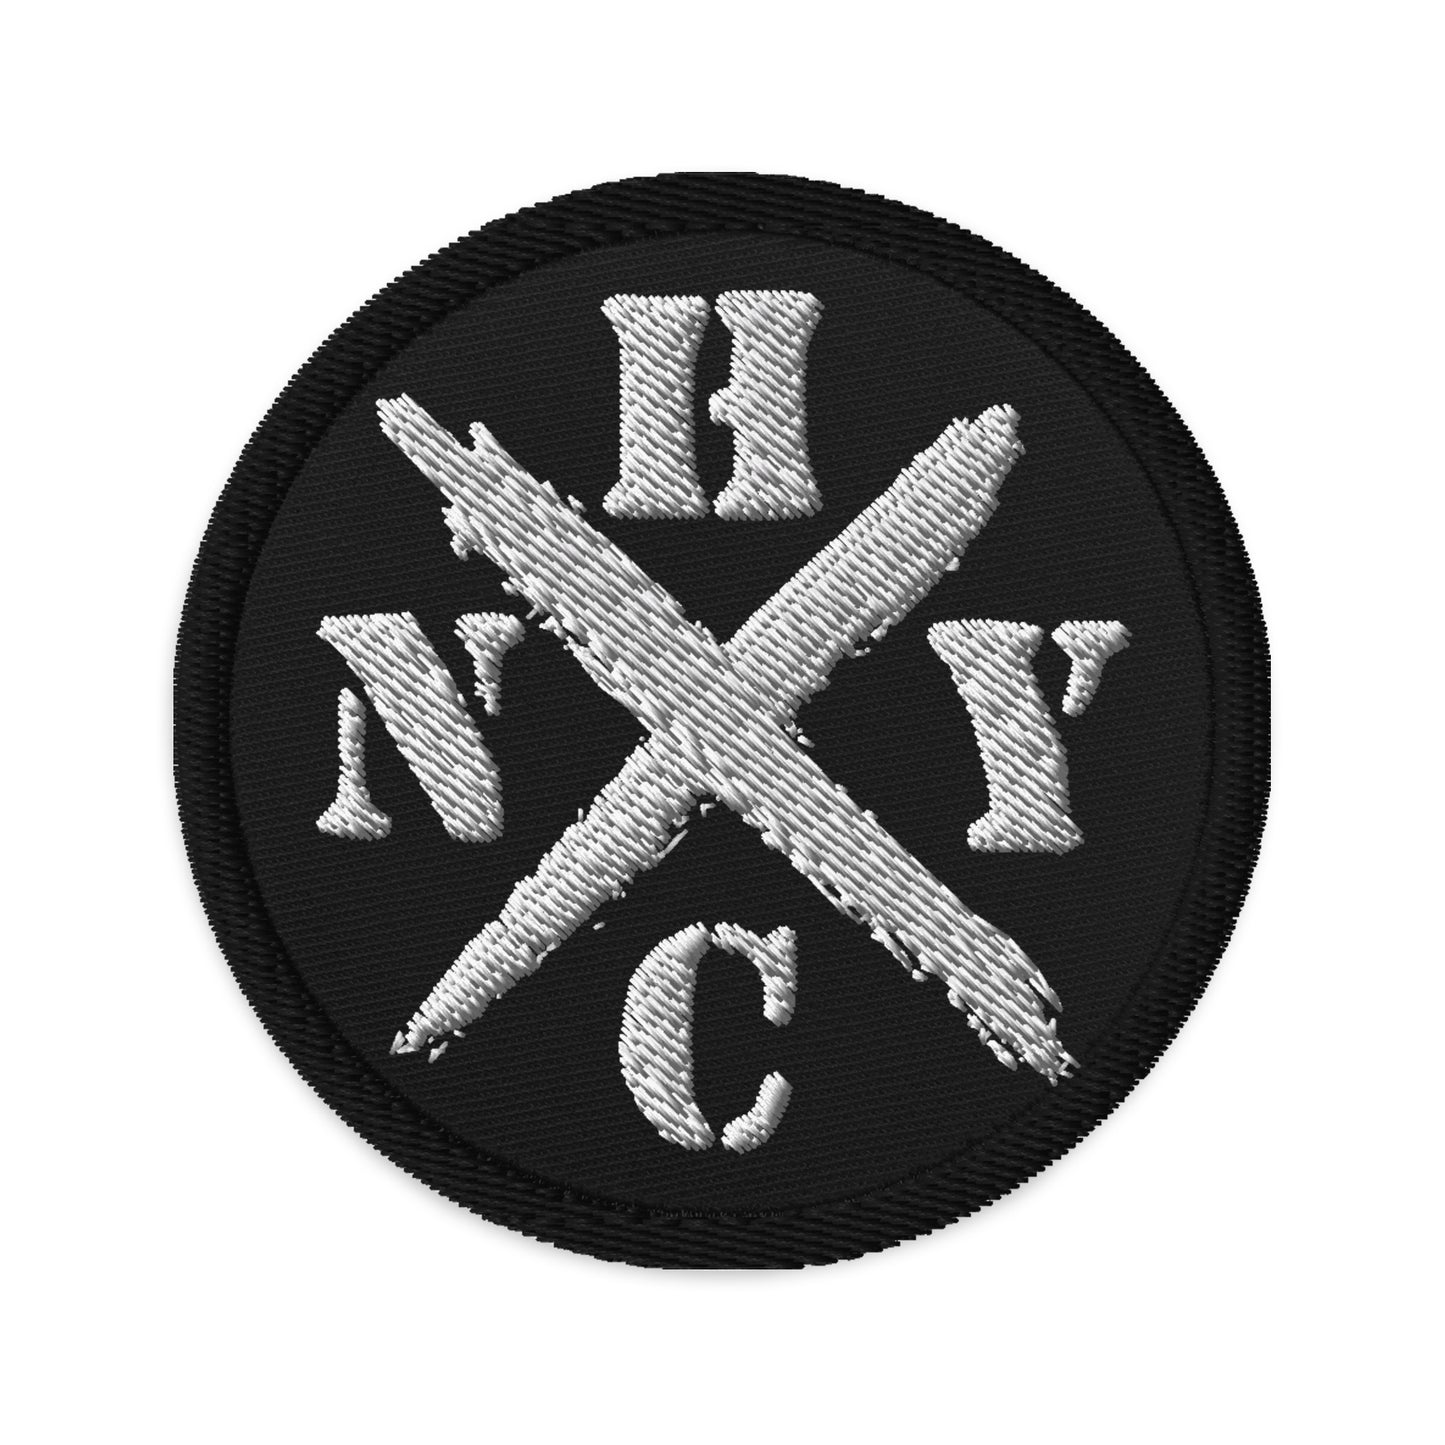 NYHC Embroidered patches